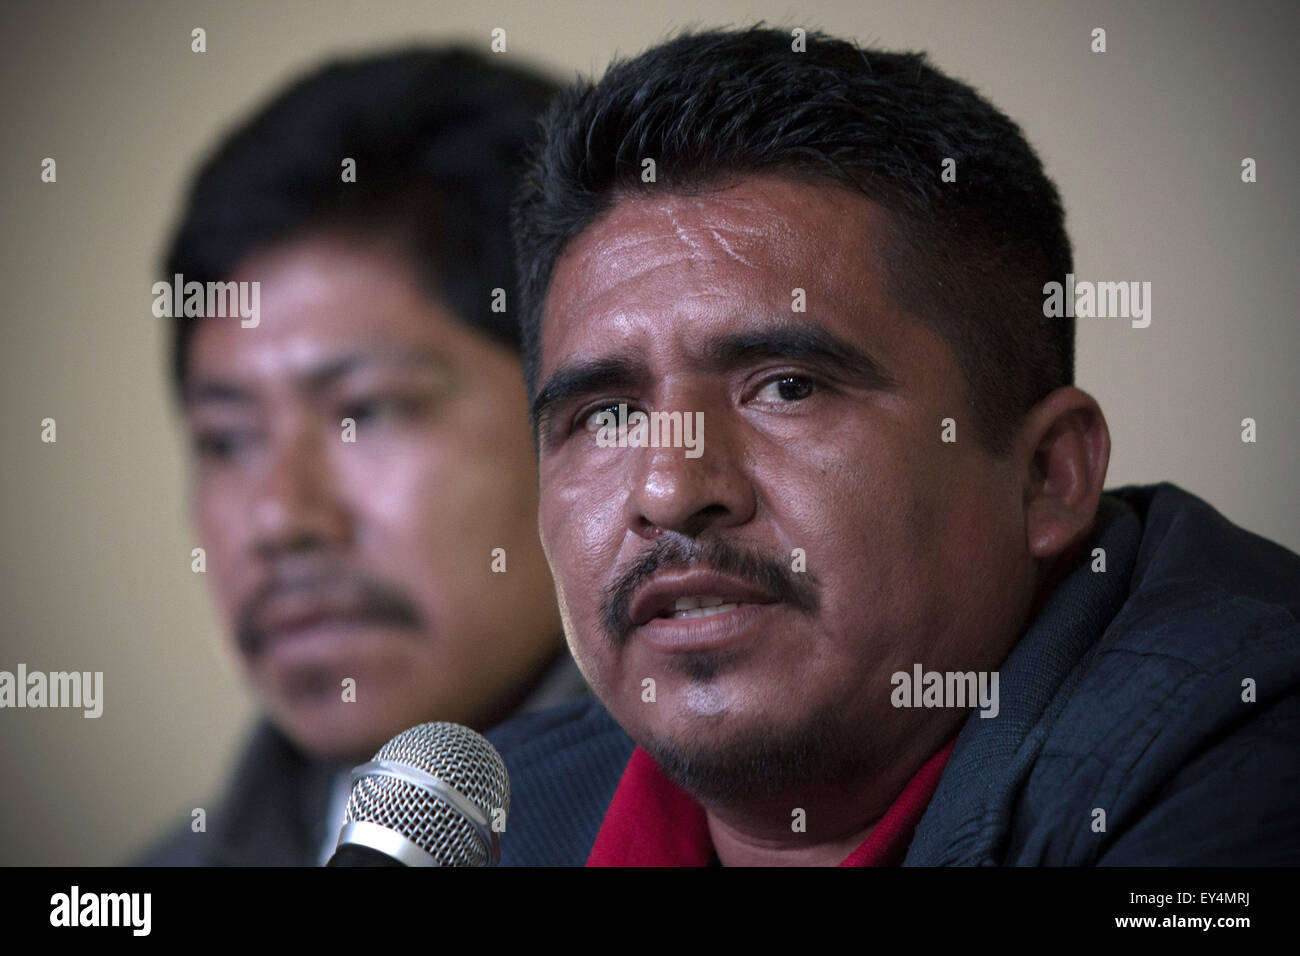 (150721) -- MEXICO CITY, July 21, 2015 (Xinhua) -- Agustin Vera (R), member of the Nahua Community of Ostula, Michoacan, participates in a press conference, in Mexico City, capital of Mexico, on July 21, 2015. According to the local press, during the conference, the members of the Nahua Community of Ostula, Michoacan, gave their testimony on the alleged clash between residents and military elements on July 19, 2015, in the framework of a demonstration after the capture of the leader of the self-defense group of the Michoacan's Costa-Sierra Nahua, Semei Verdia Zepeda. (Xinhua/Alejandro Ayala) ( Stock Photo